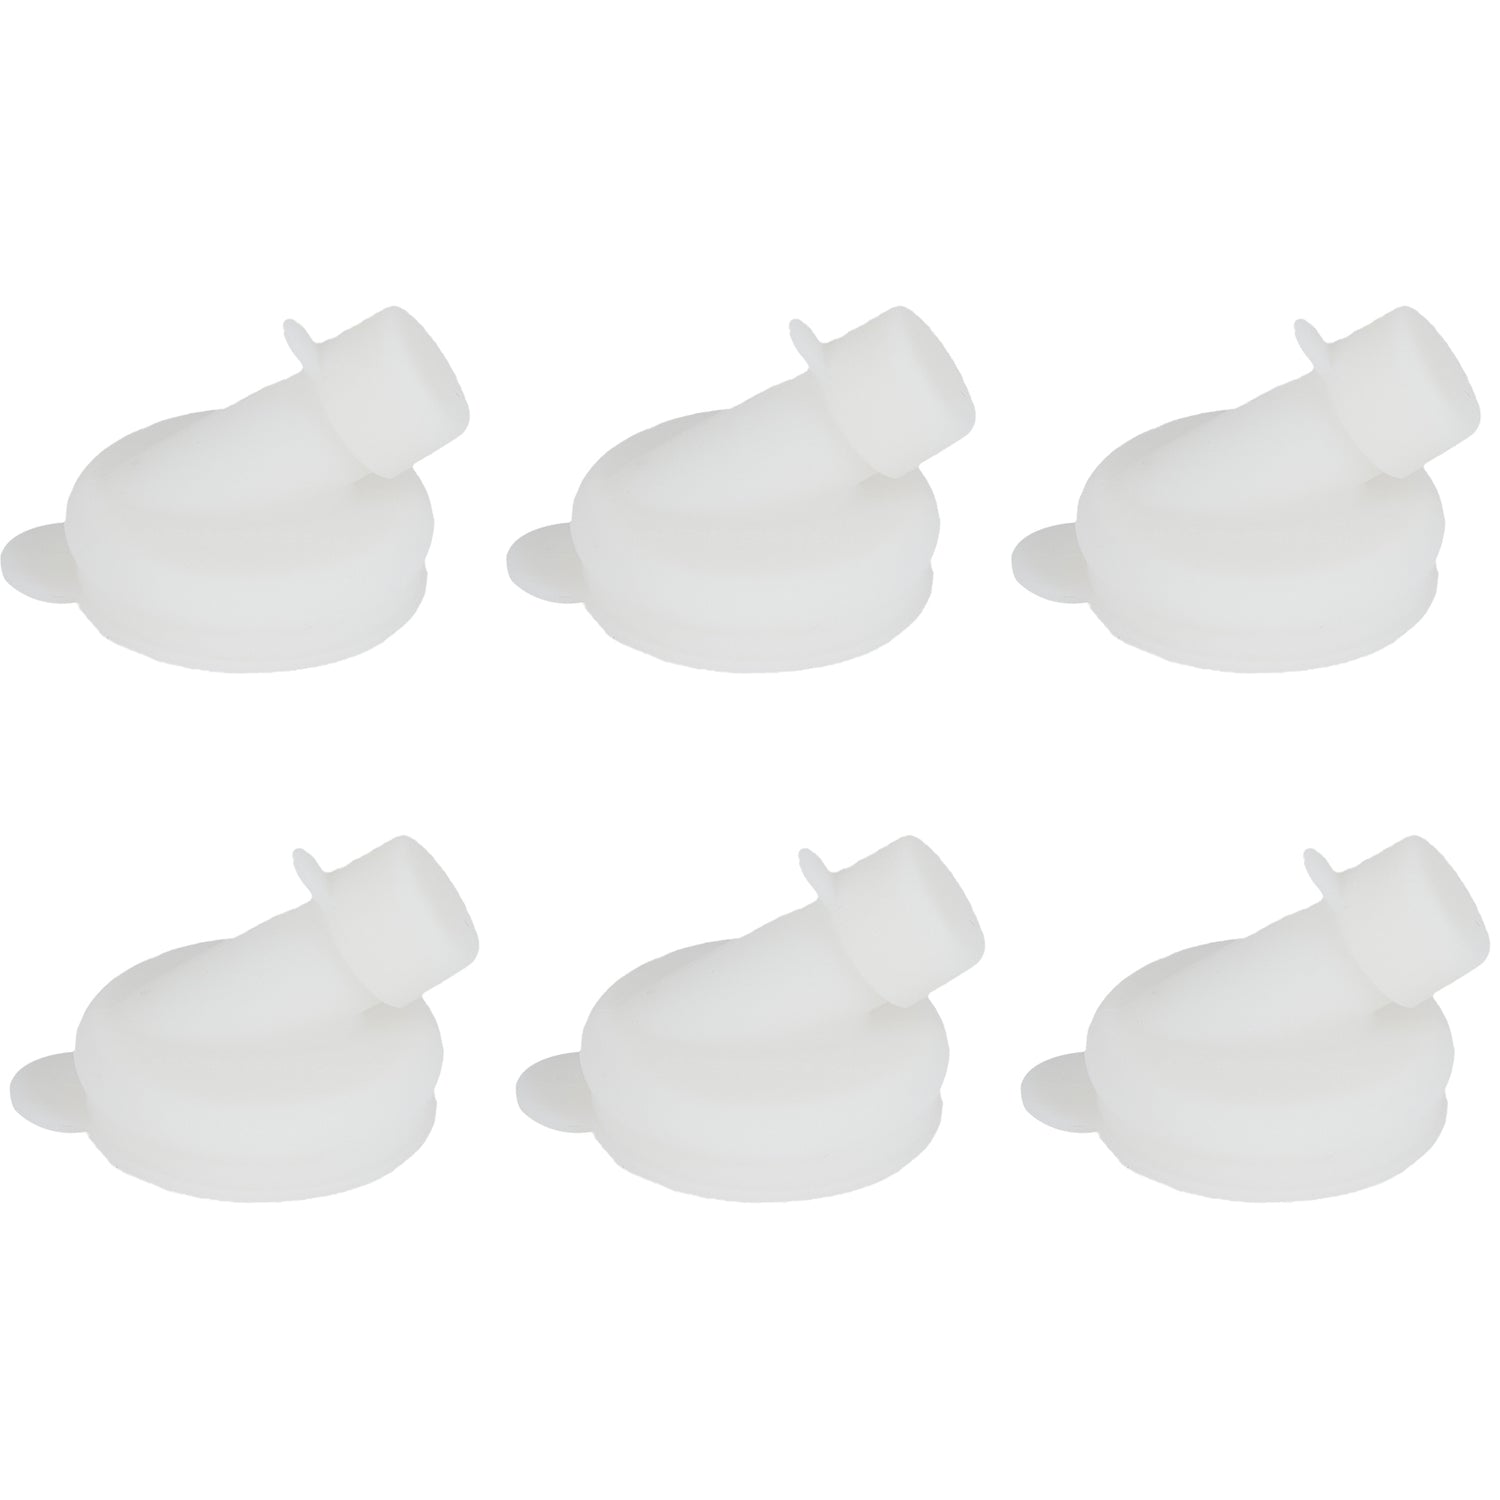 Silicone Pour Spout for The Dairy Shoppe ® Glass Bottles – Better